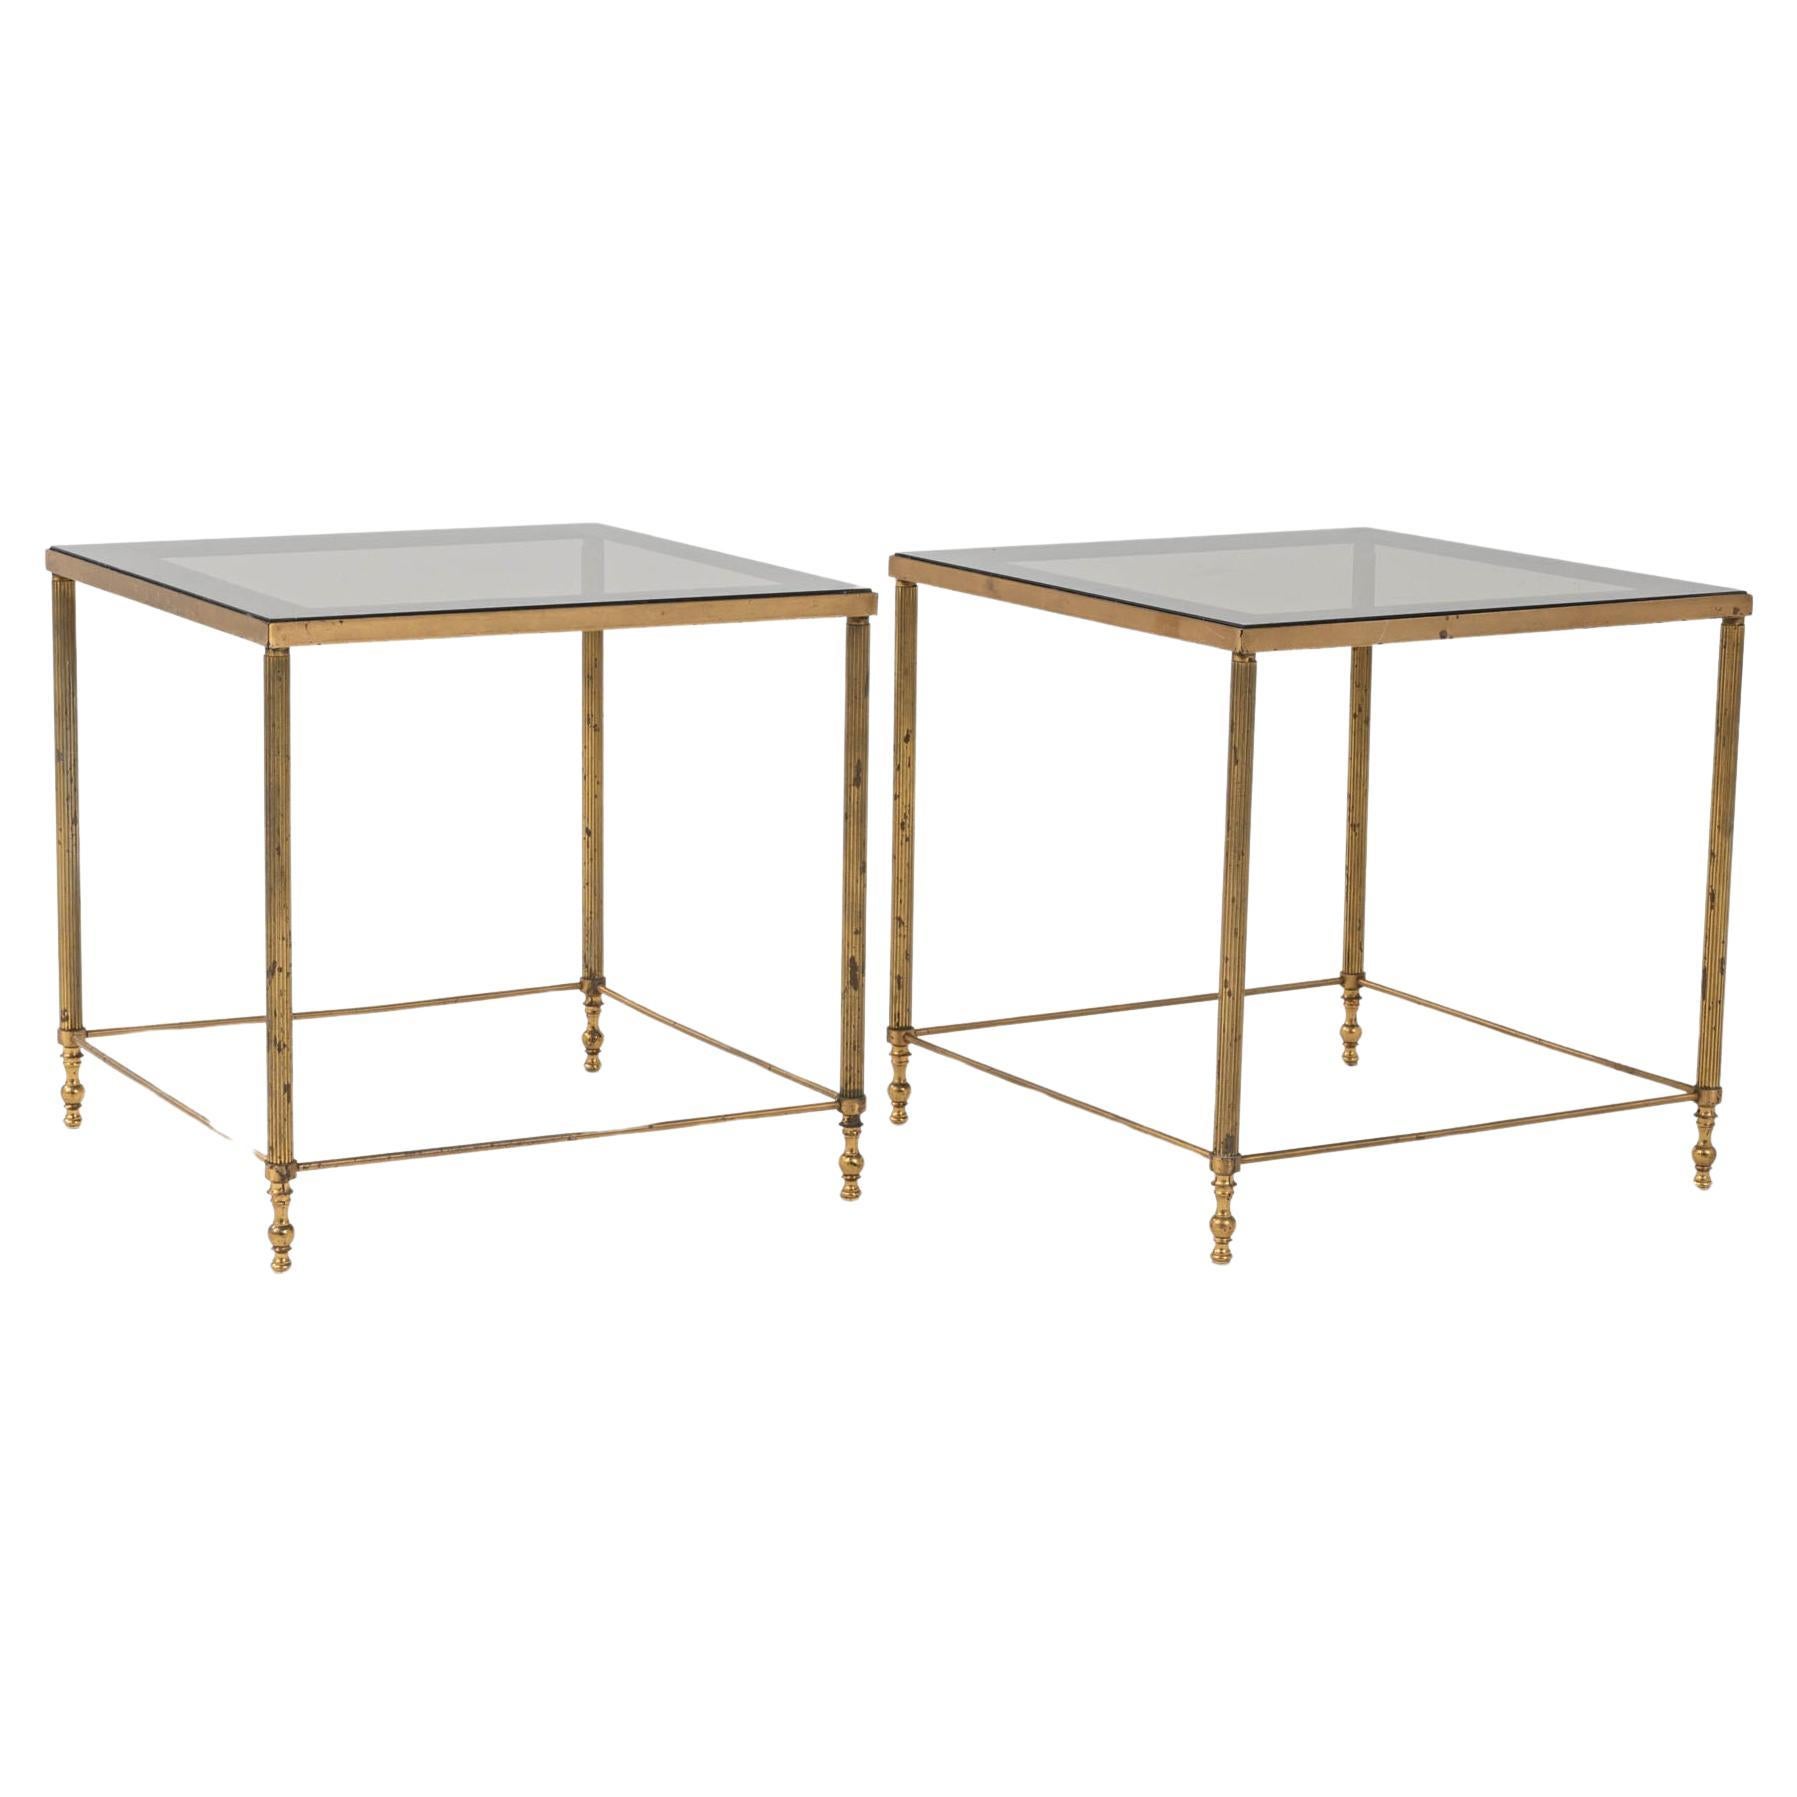 20th Century French Pair Of Brass Coffee Tables With Glass Tops By Maison Jansen